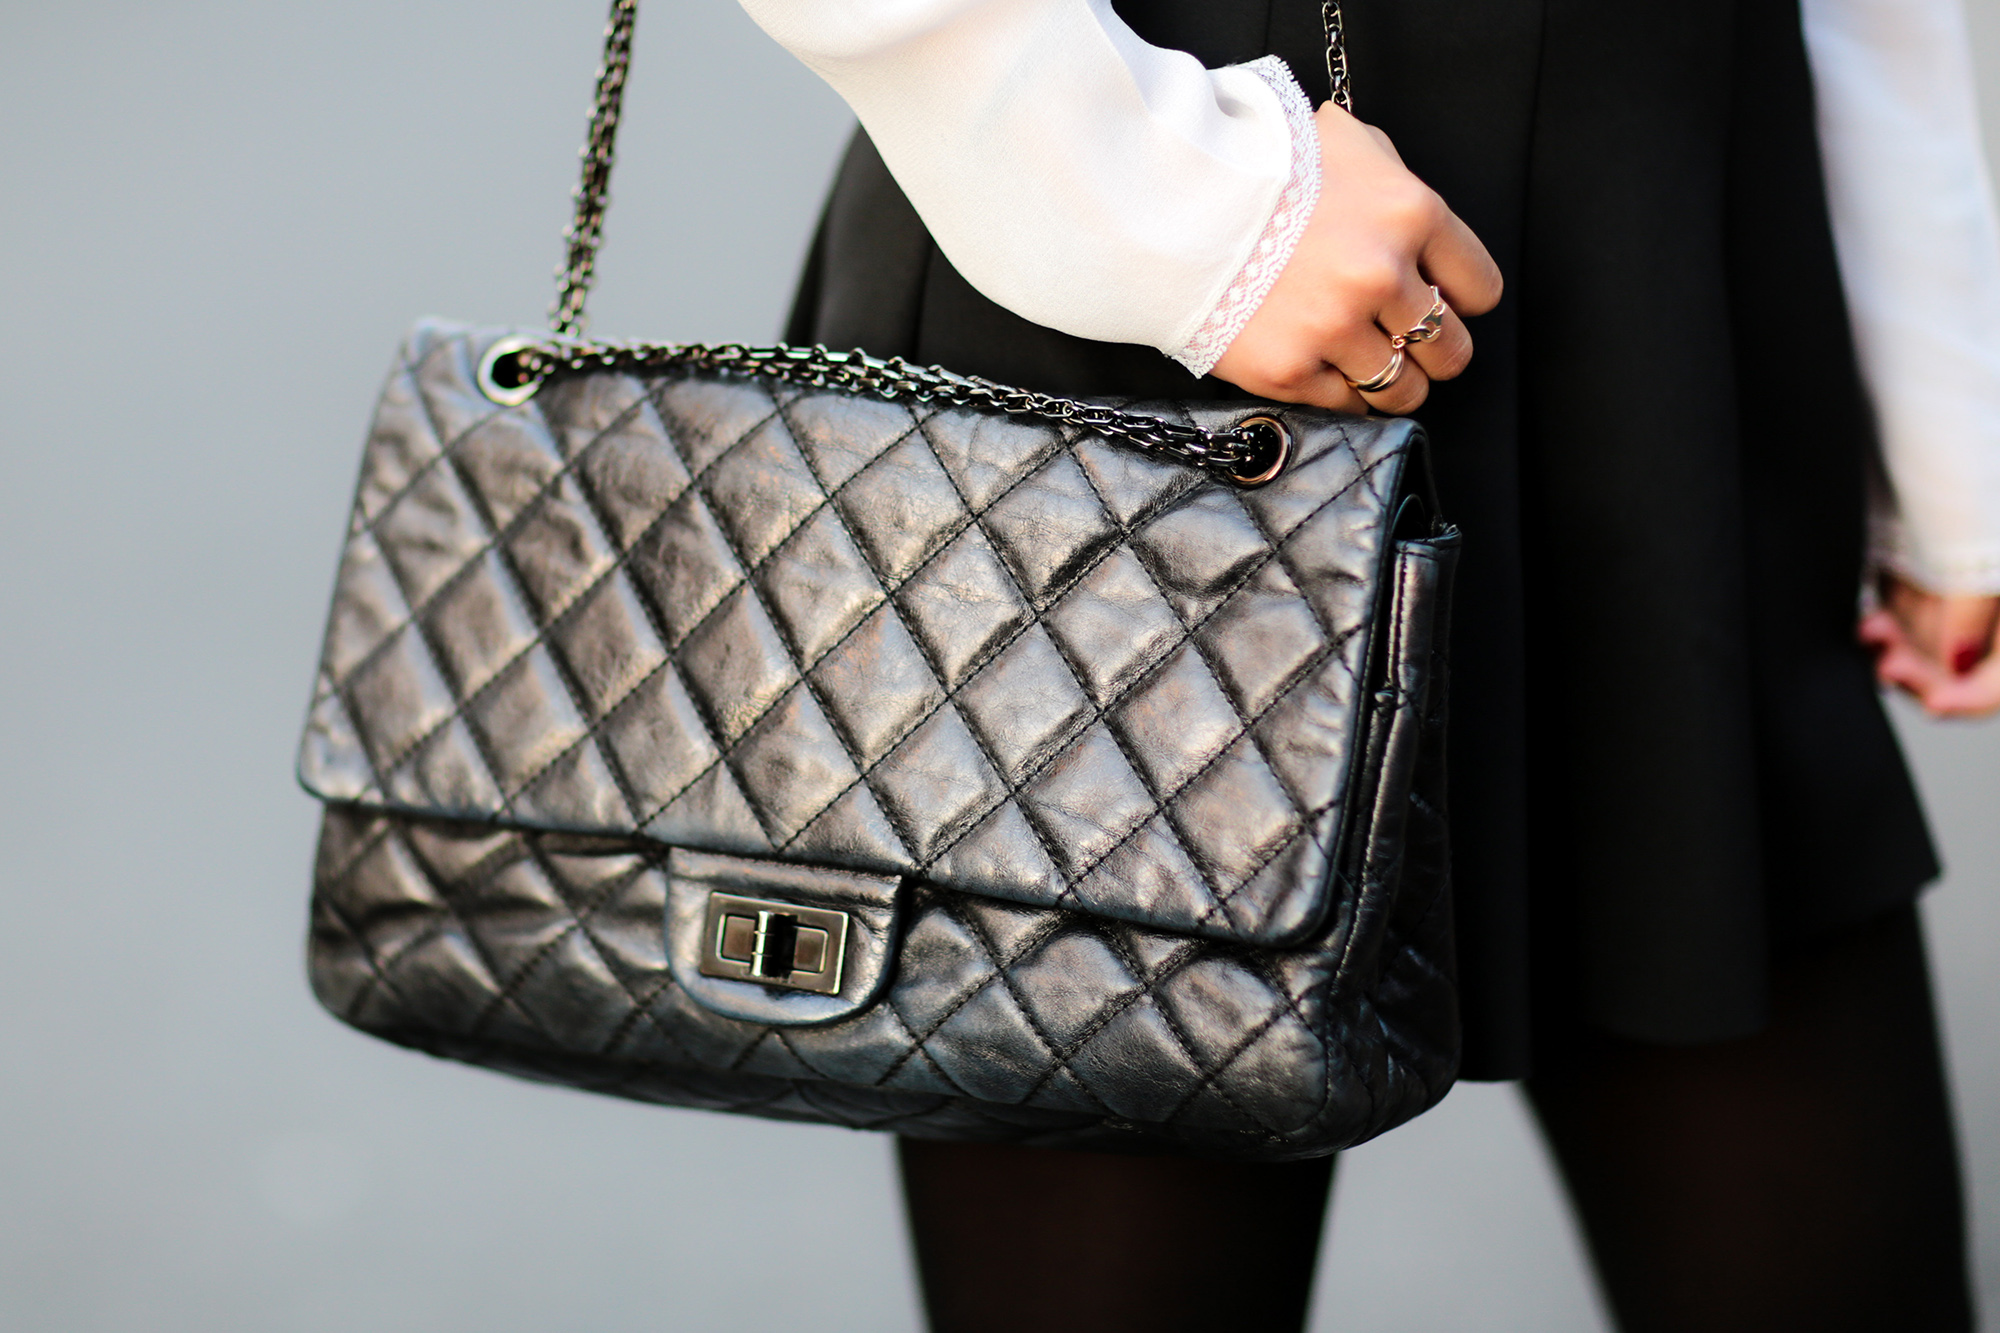 Chanel Handbag Have Gone Up by 60% Since Hermes Status - Bloomberg